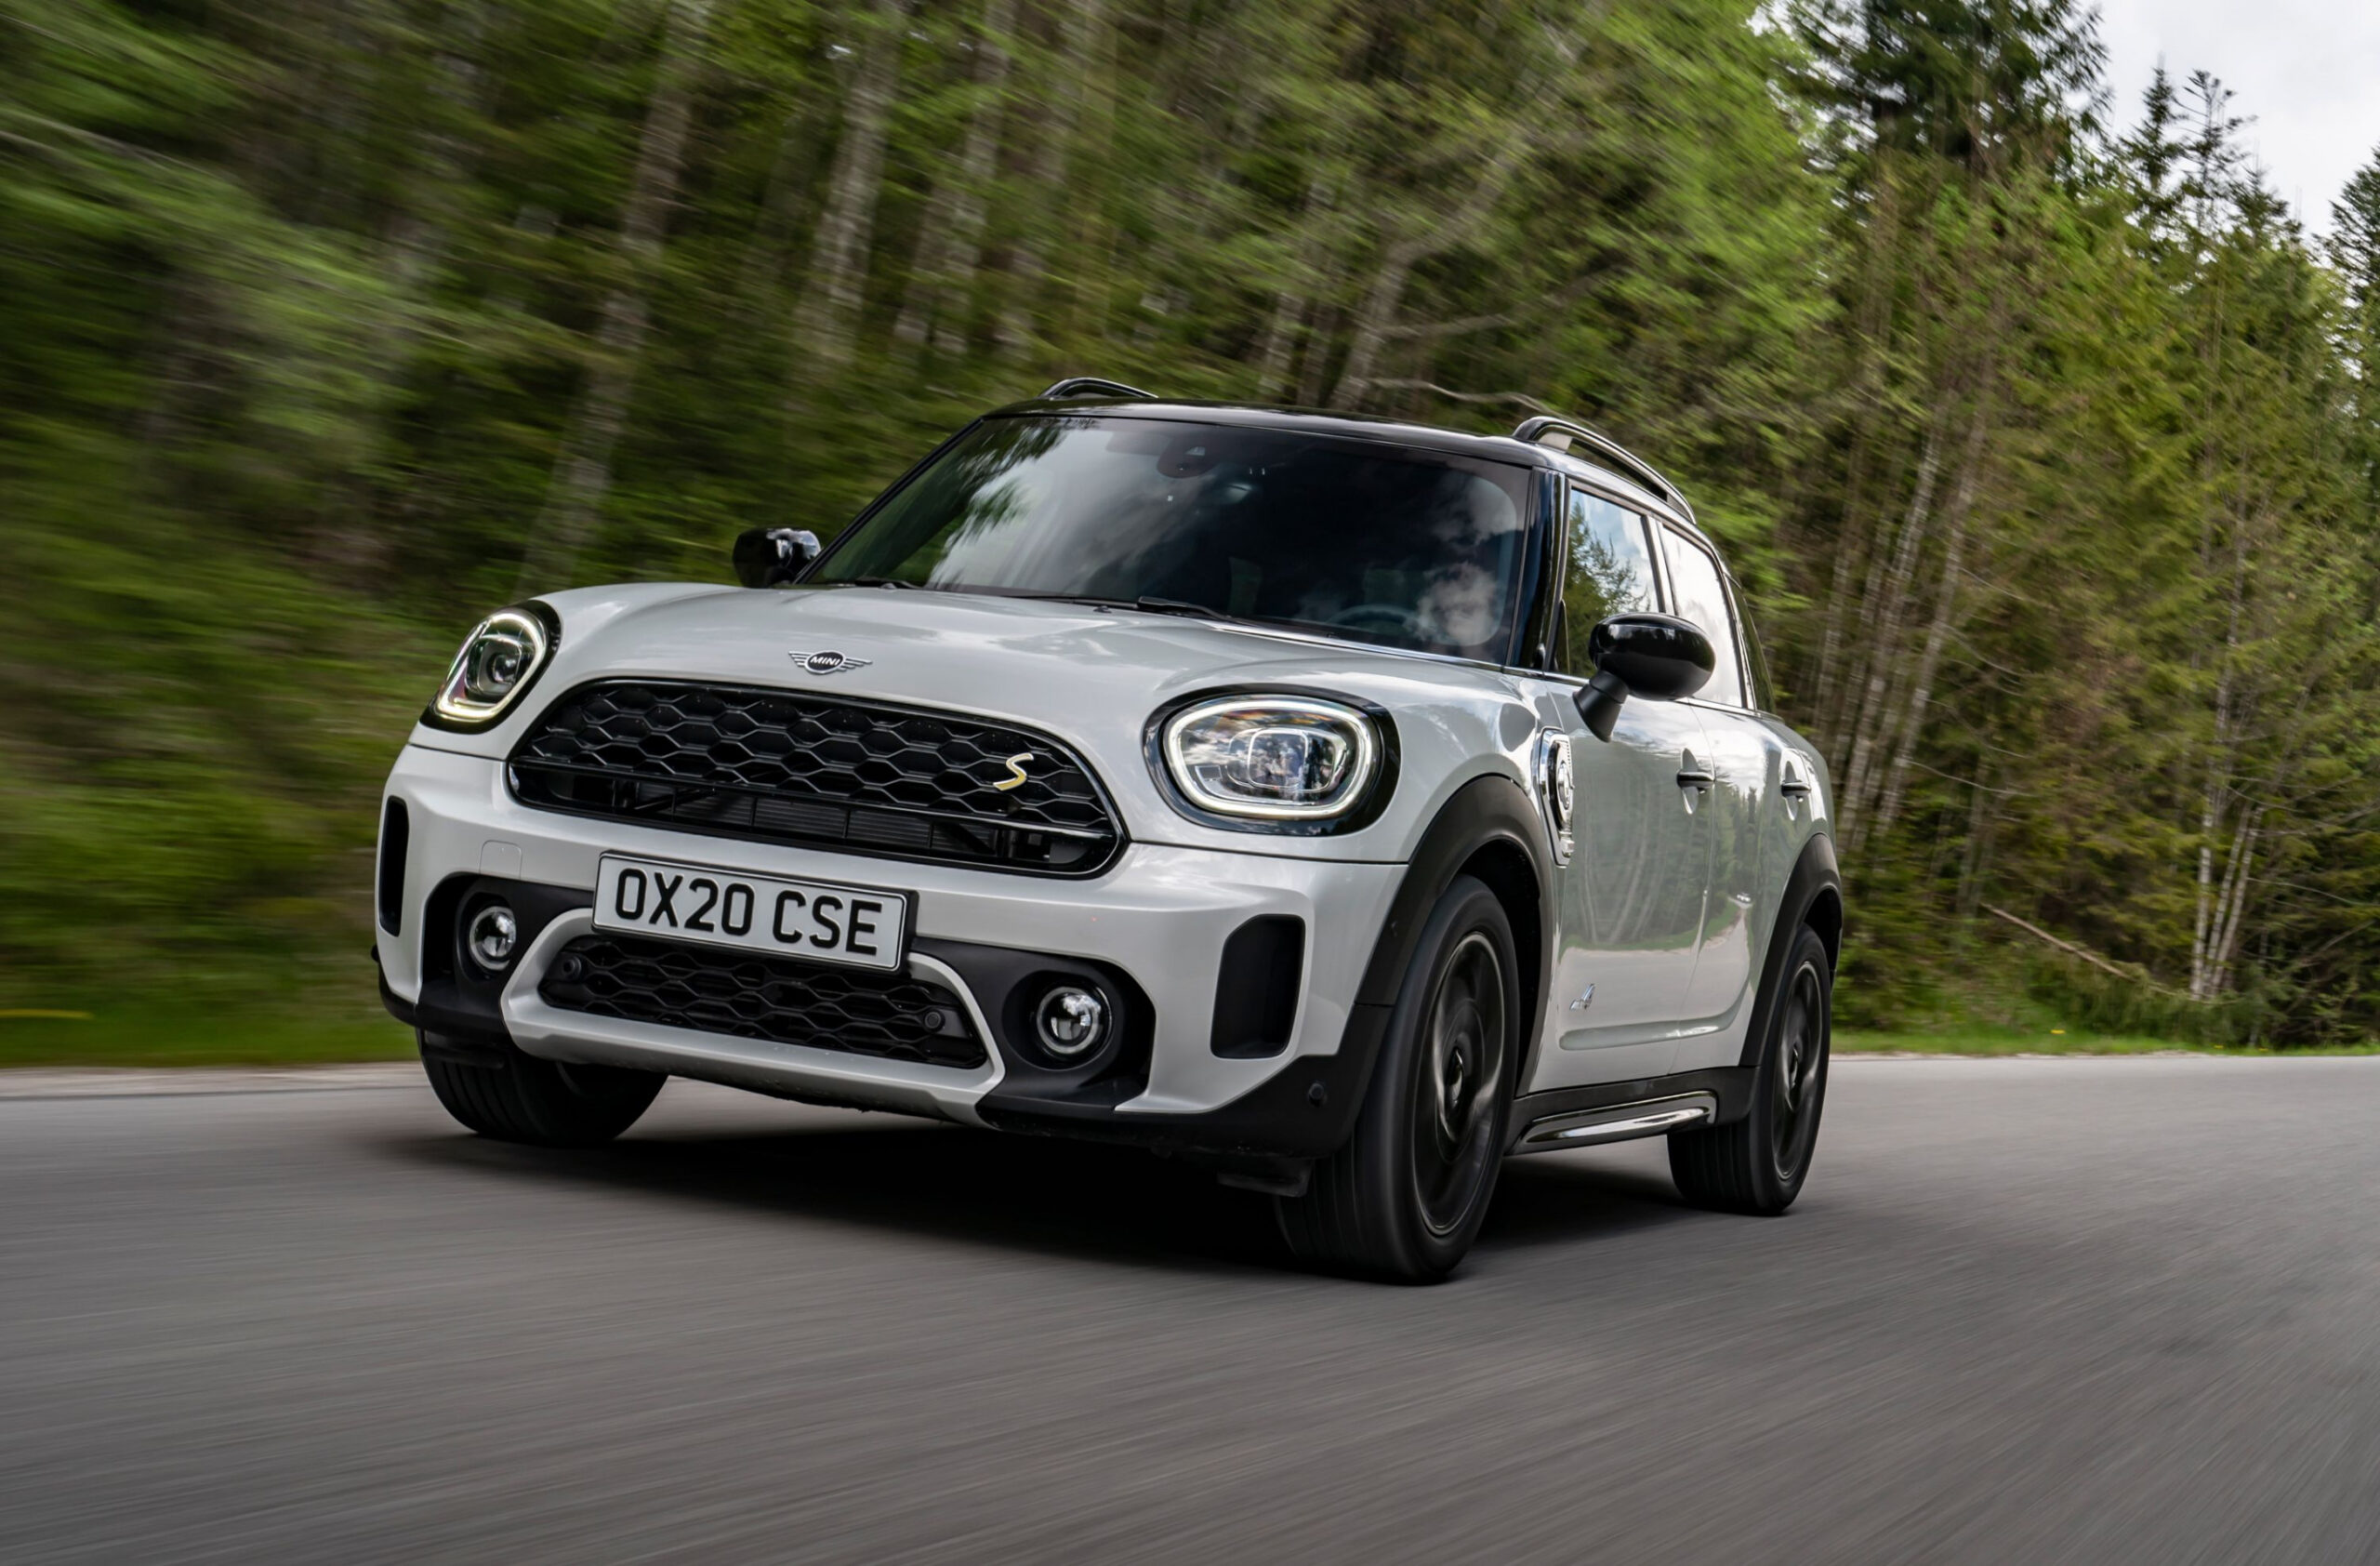 5 Mini Cooper Countryman Review, Pricing, and Specs - mini cooper countryman prices